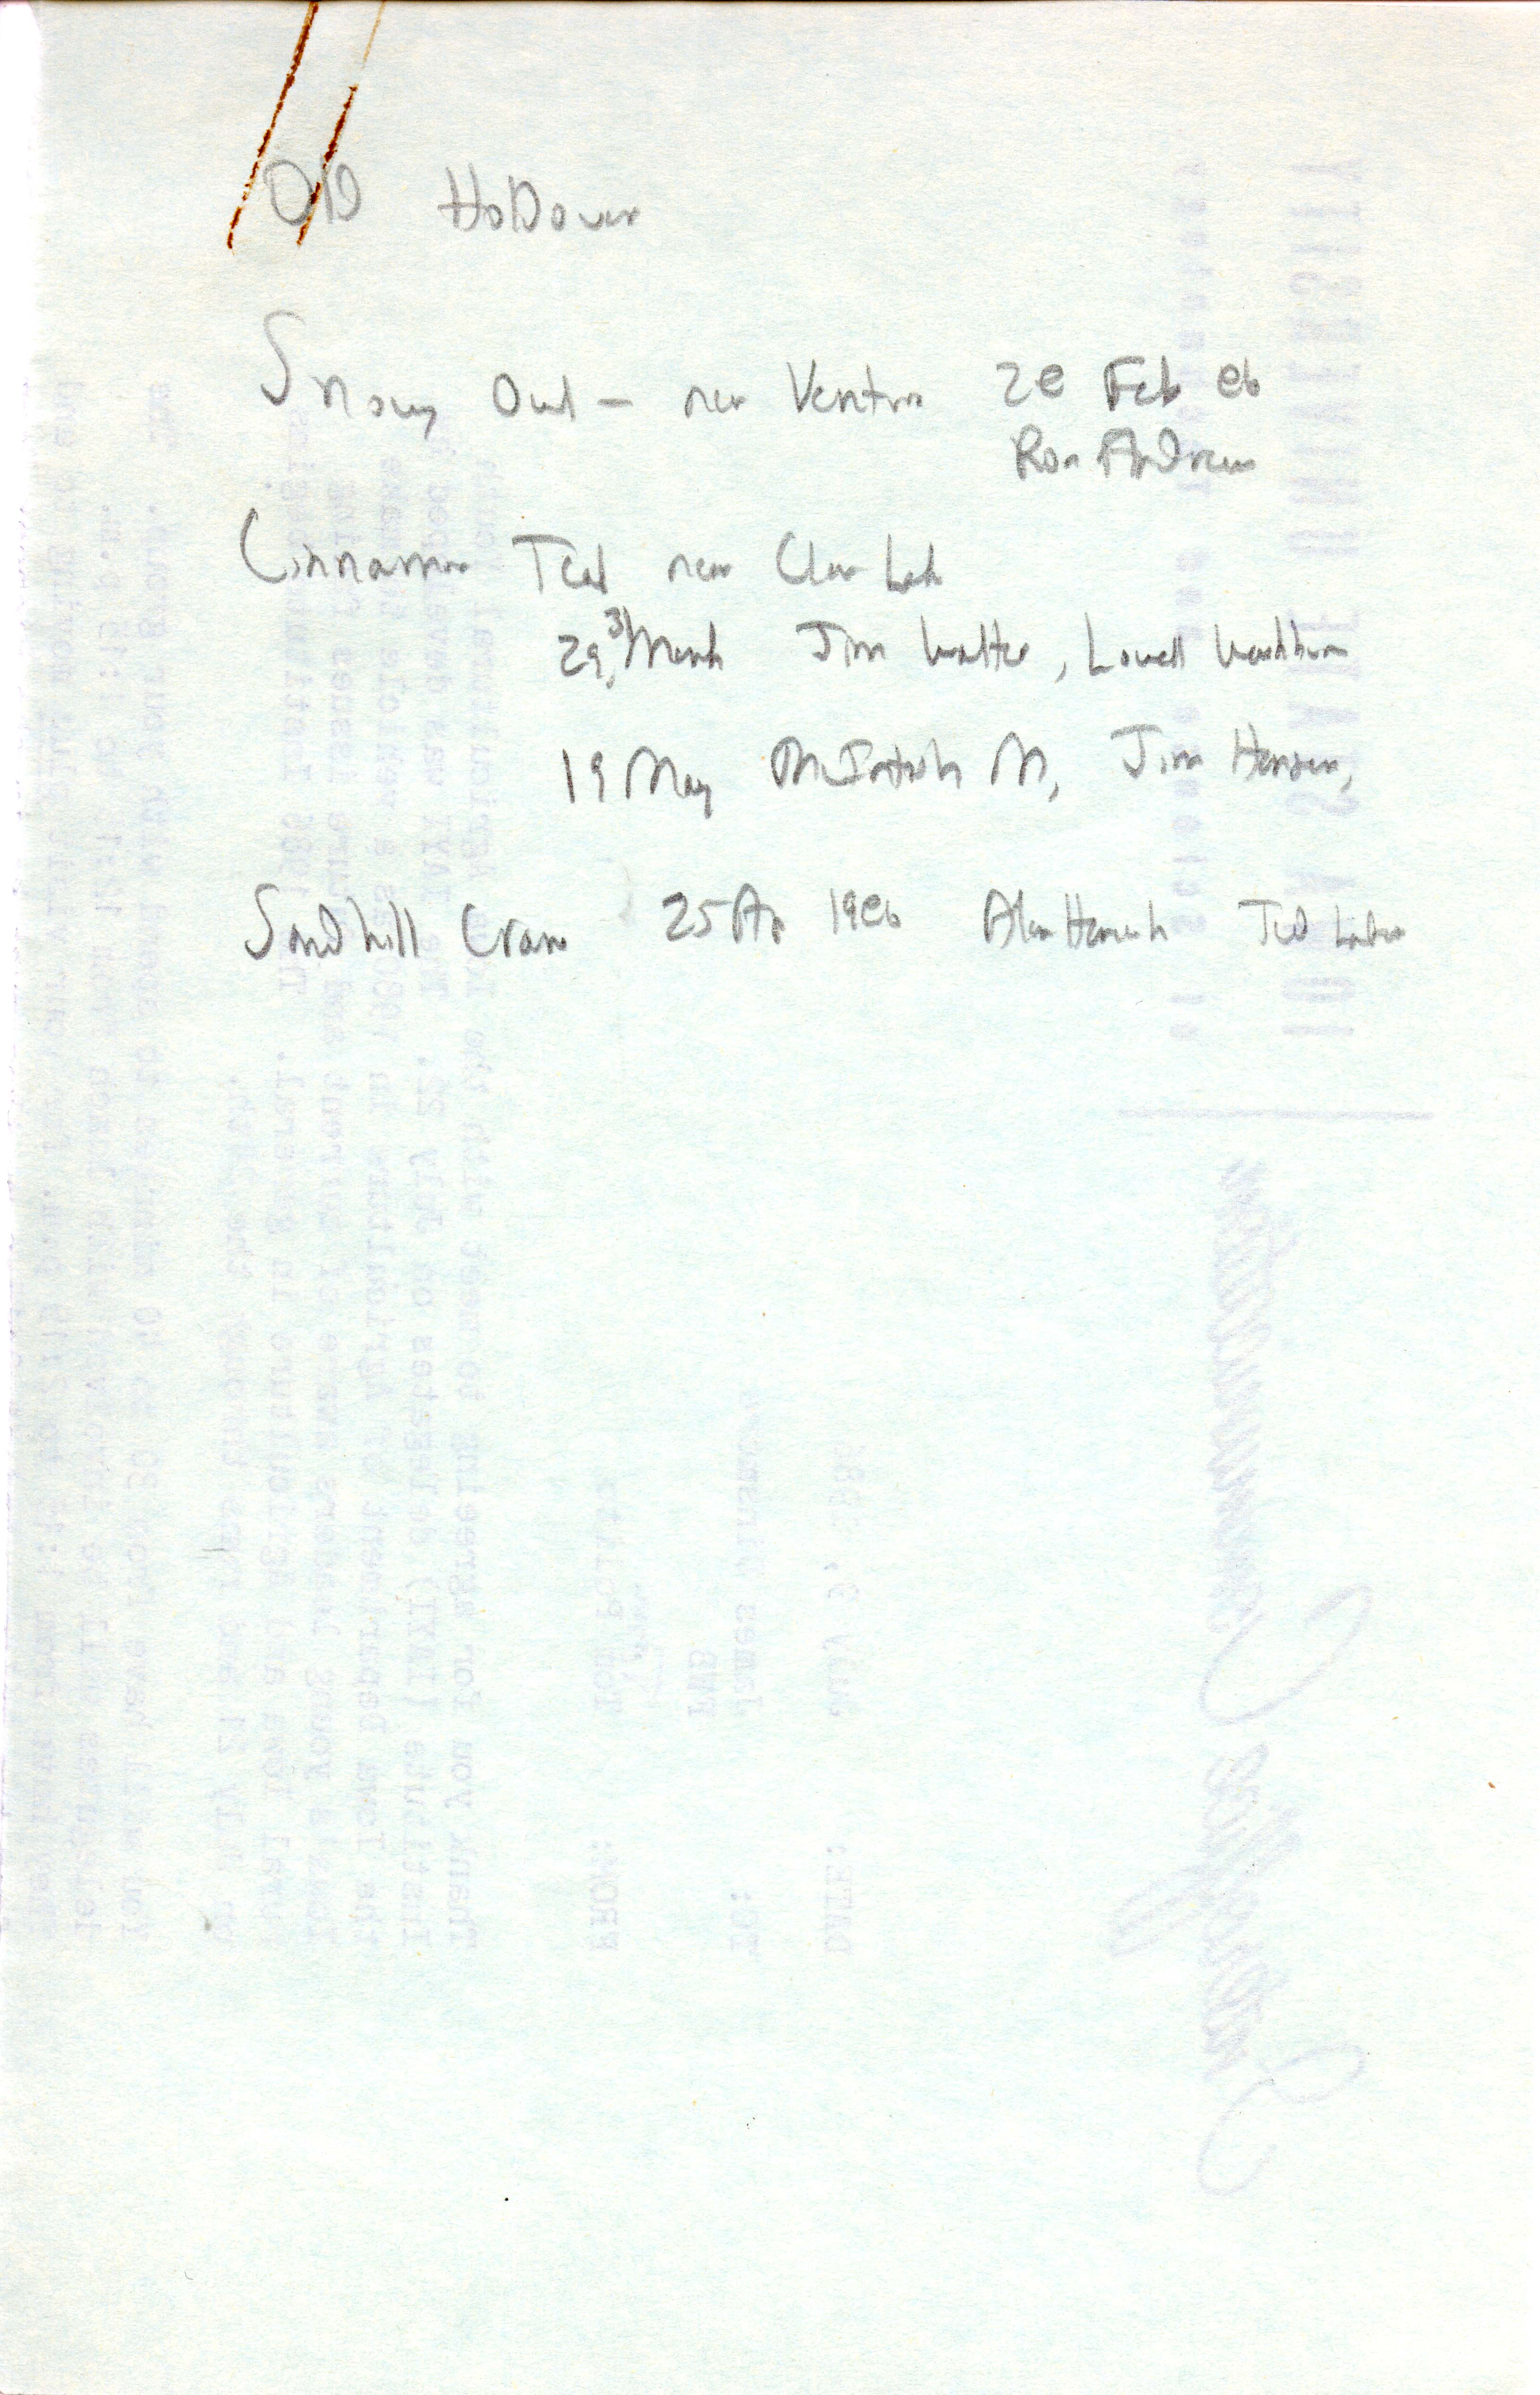 Field notes contributed by James J. Dinsmore, summer 1986